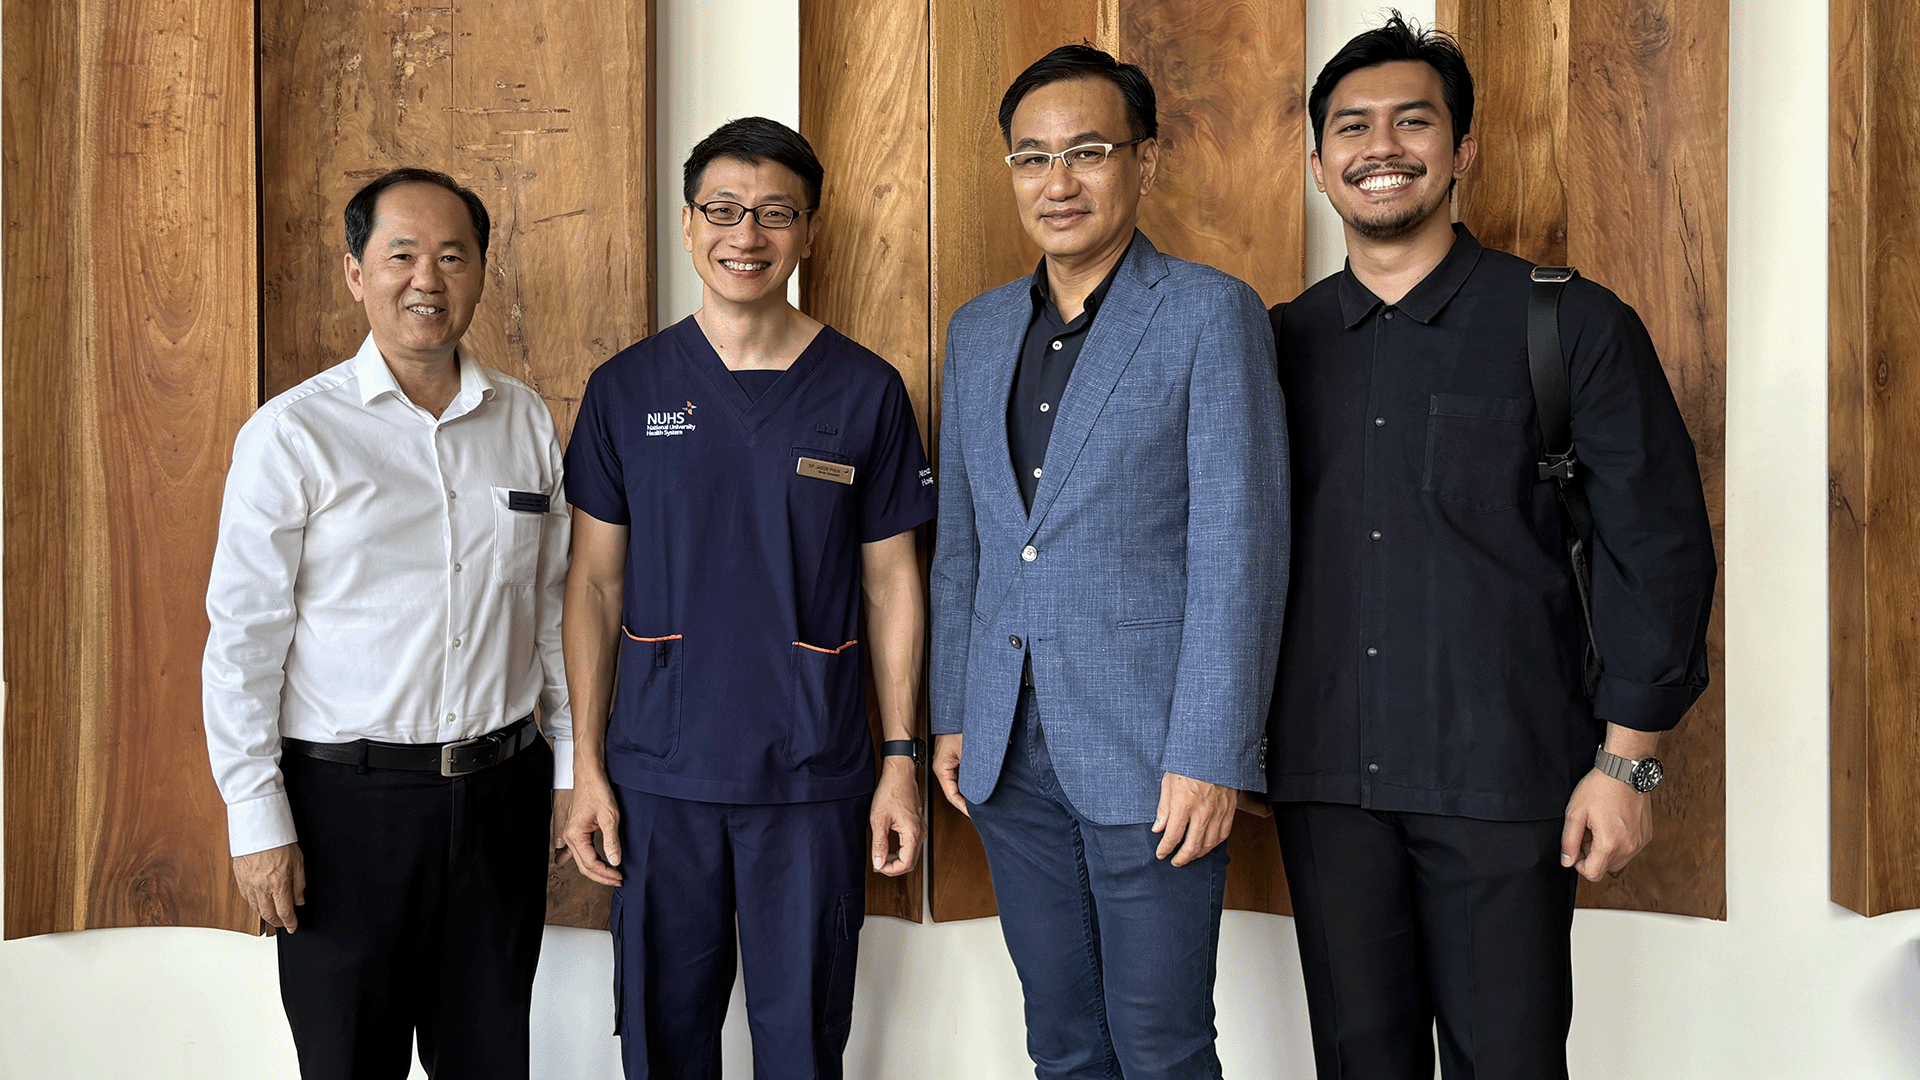 From left to right: Mr. Chua Song Khim, Deputy Chief Executive of Alexandra Hospital, Dr. Jason Phua, CEO of Alexandra Hospital, NUS Assoc Prof Shinya Okuda, Founding Director of SkyTimber Design Lab and Ahmad Amirul bin Ahmad, Research Assistant at SkyTimber.